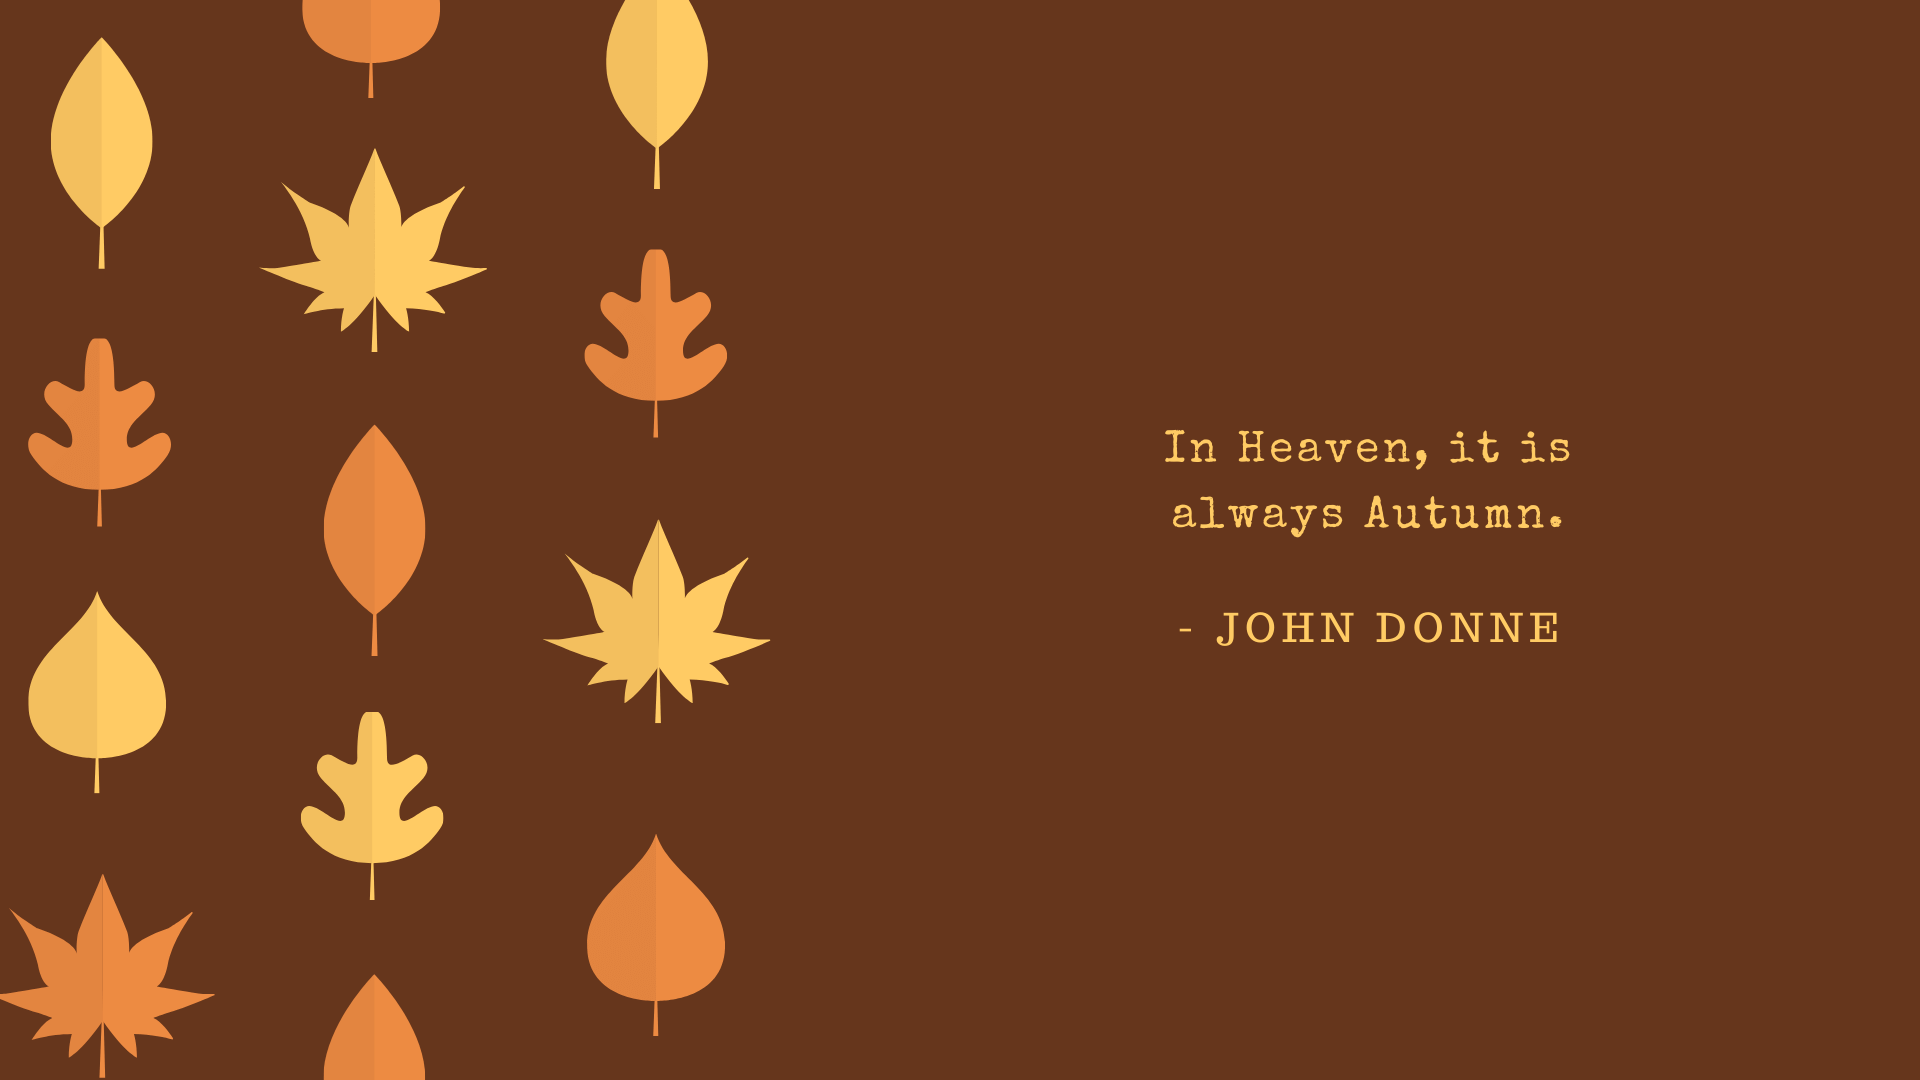 Welcome Autumn Wallpapers